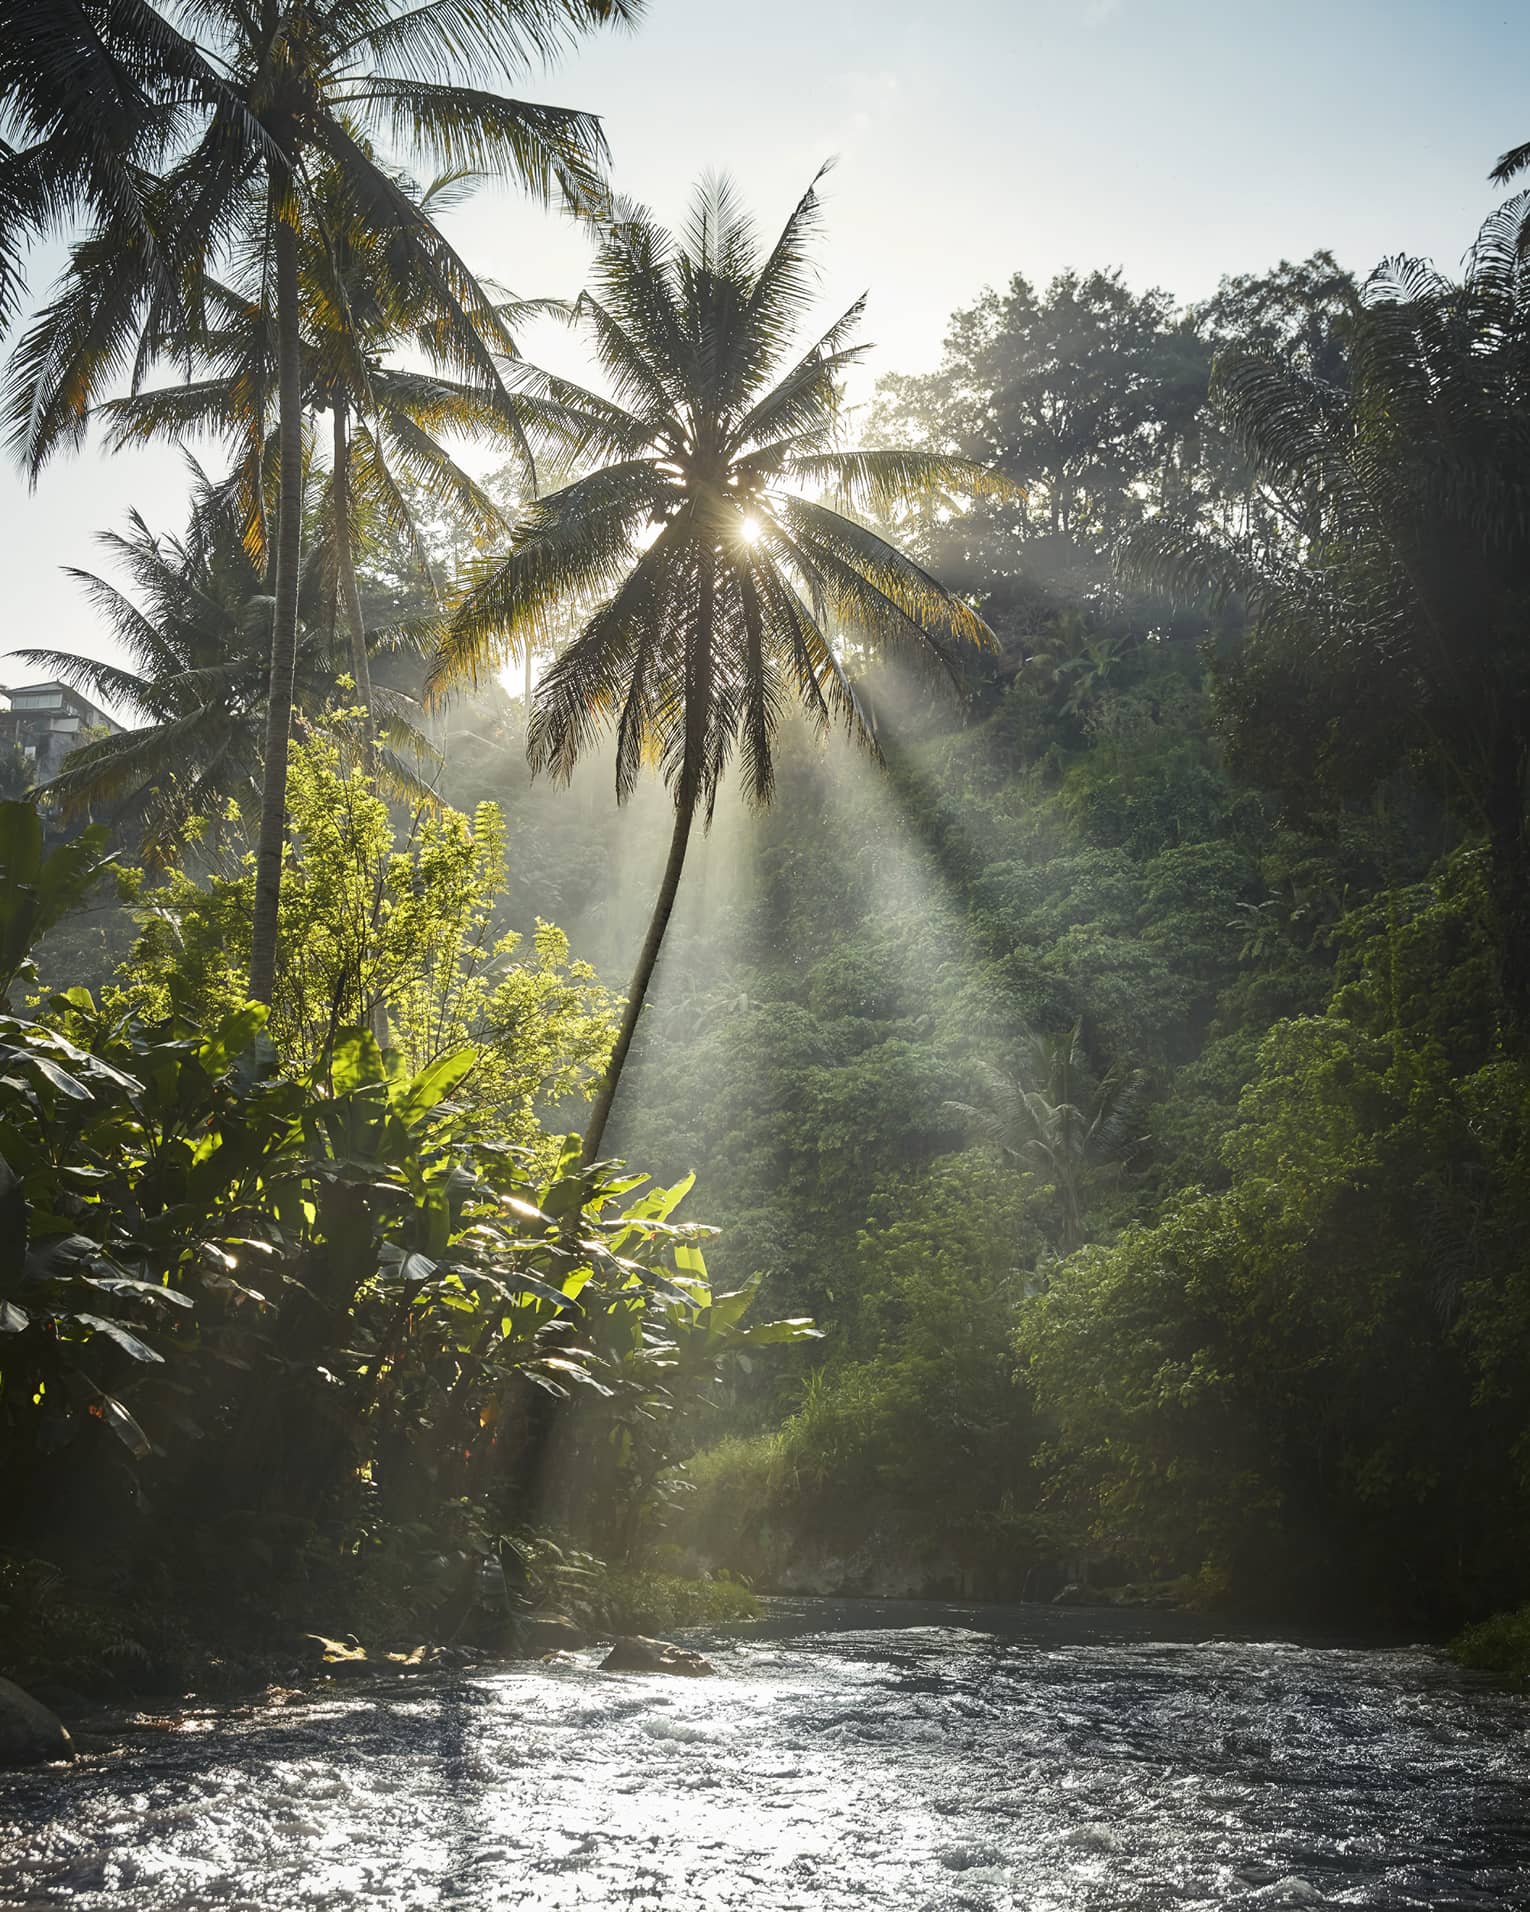 Light streams though the leaves of a palm tree and onto a river